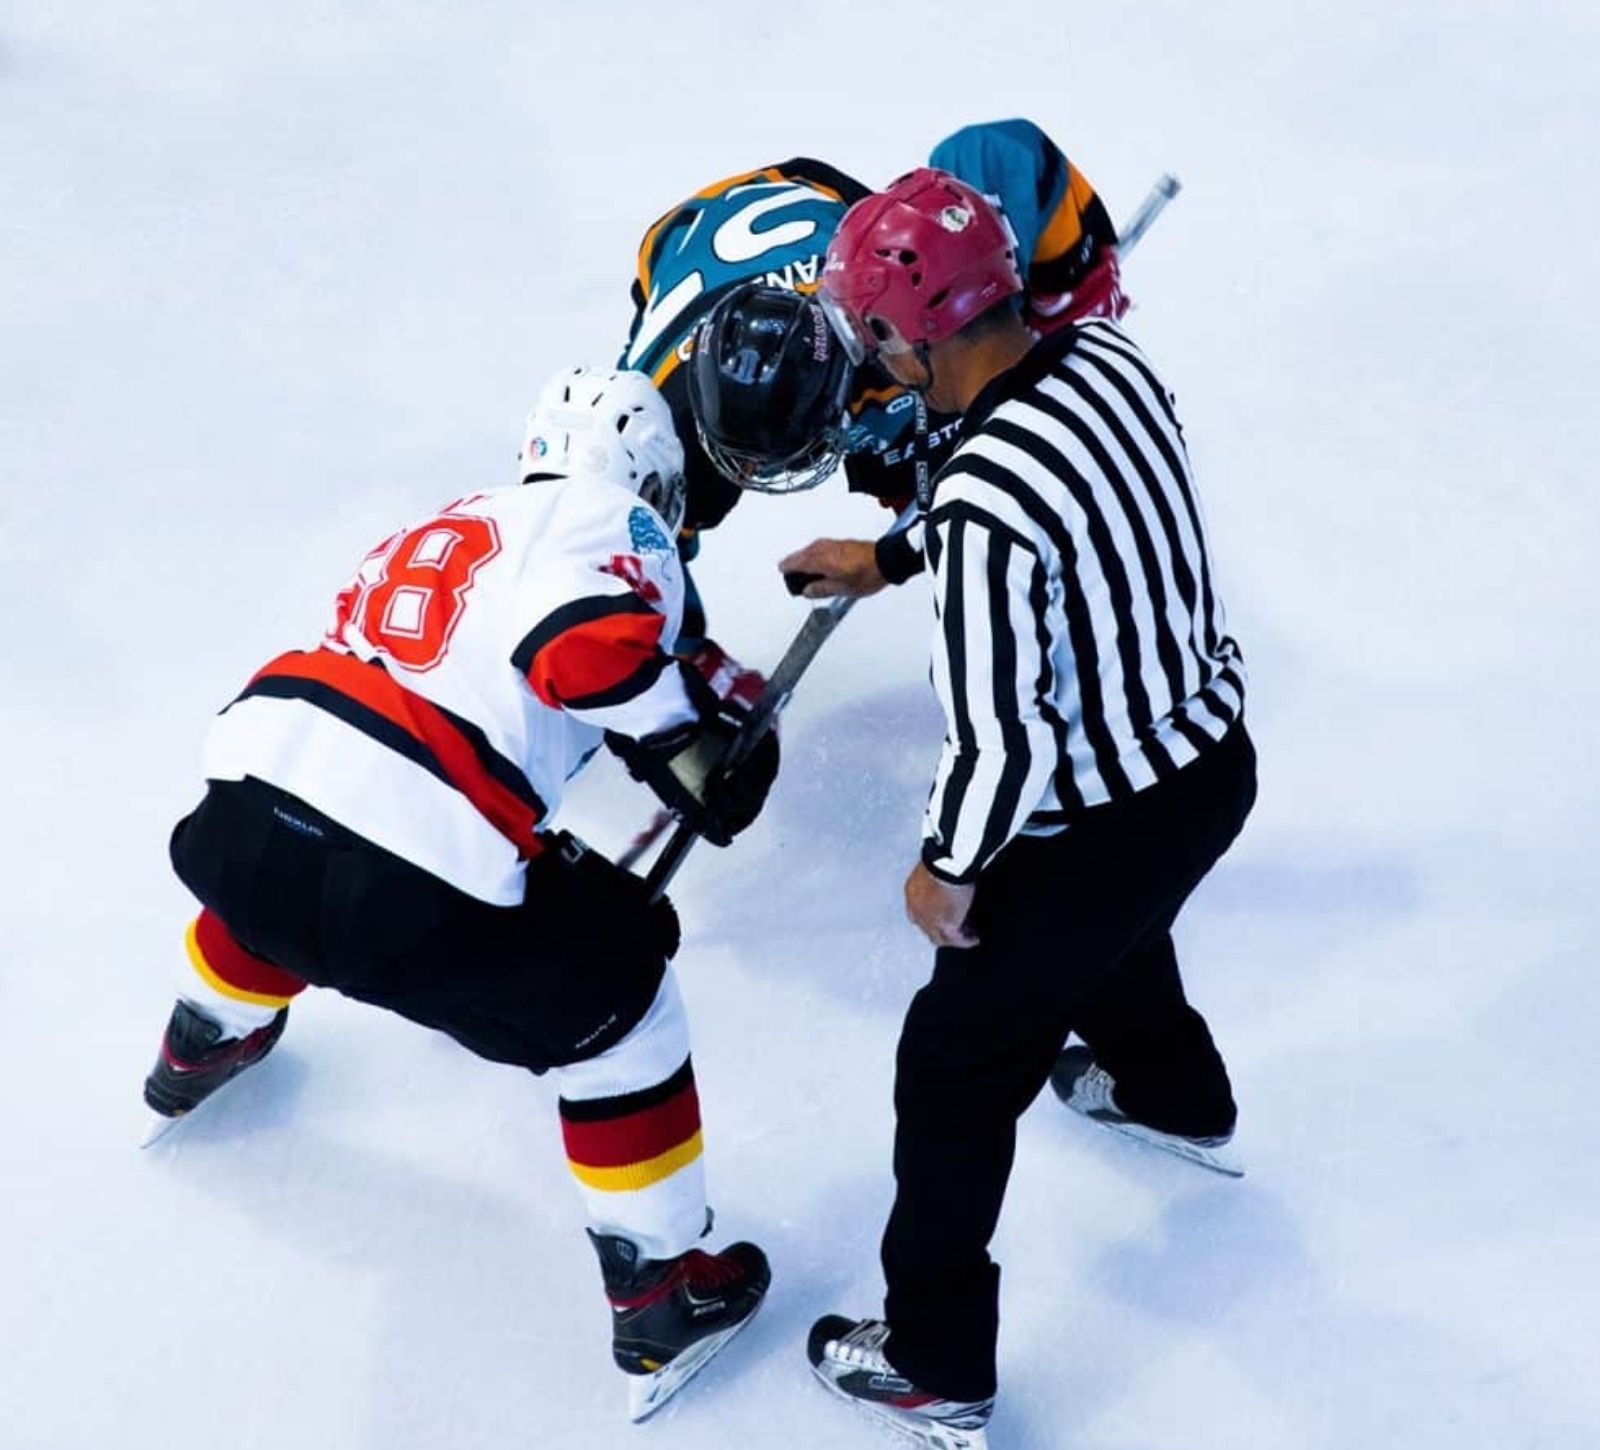 Kitchen Table CEOs blog - Do You Let Your Kids Make Mistakes? Managing Kids, a Household and a Business Working from Home - kids facing off in hockey with a referree